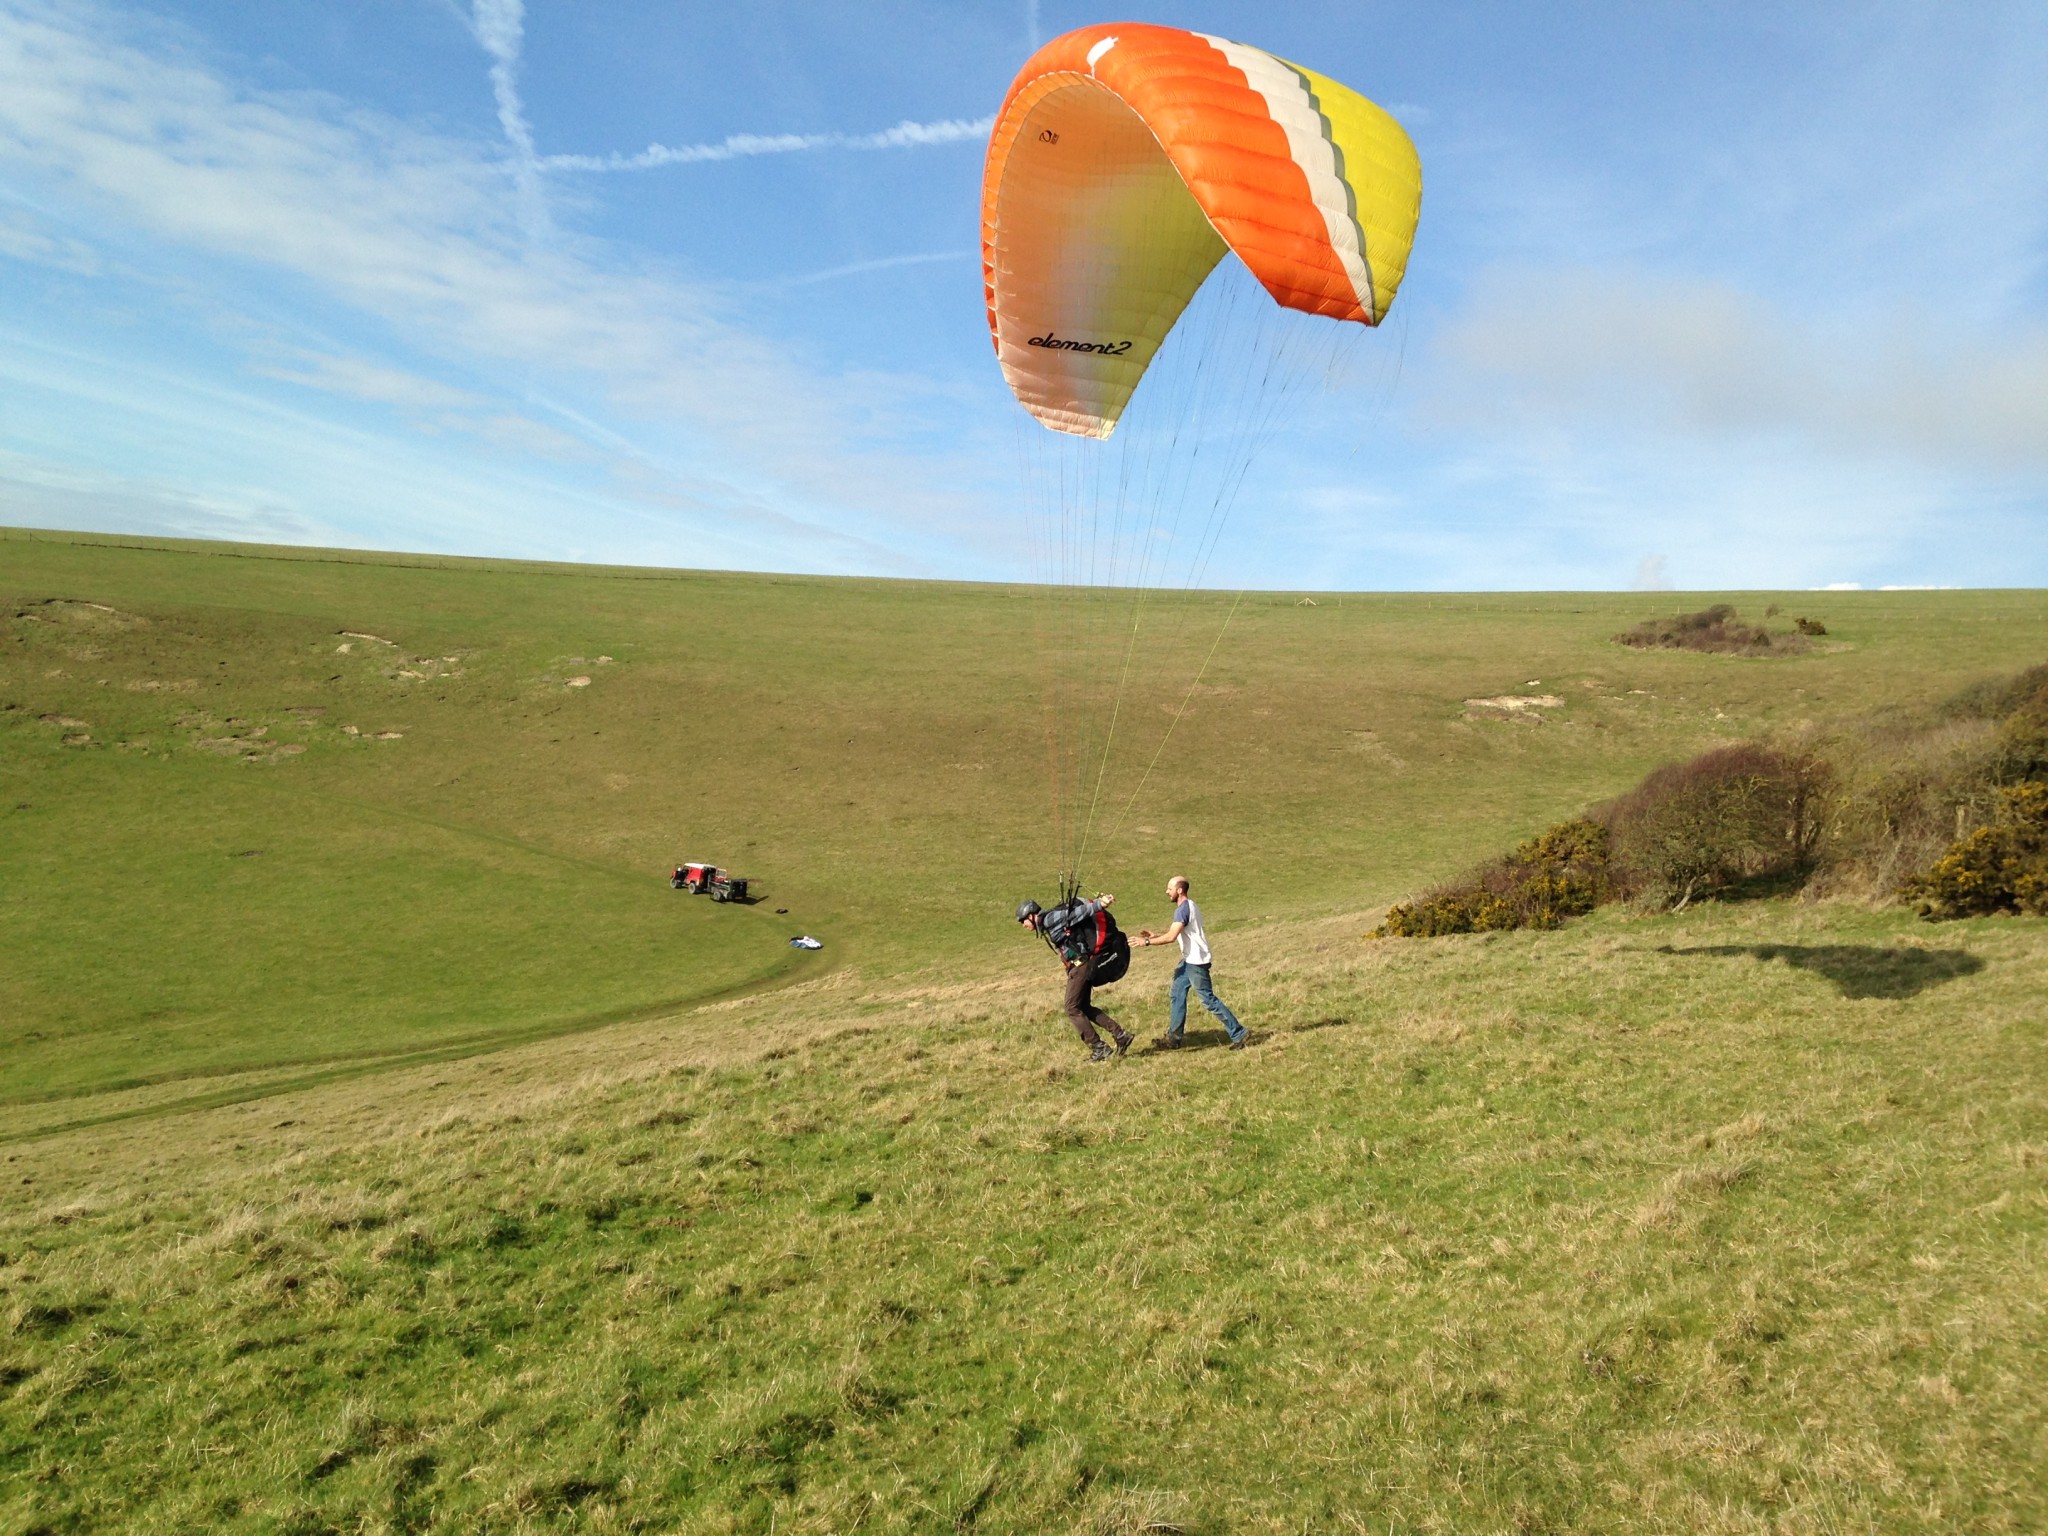 Elementary Pilot (EP) – 5 Day Paragliding Course – Fly Sussex